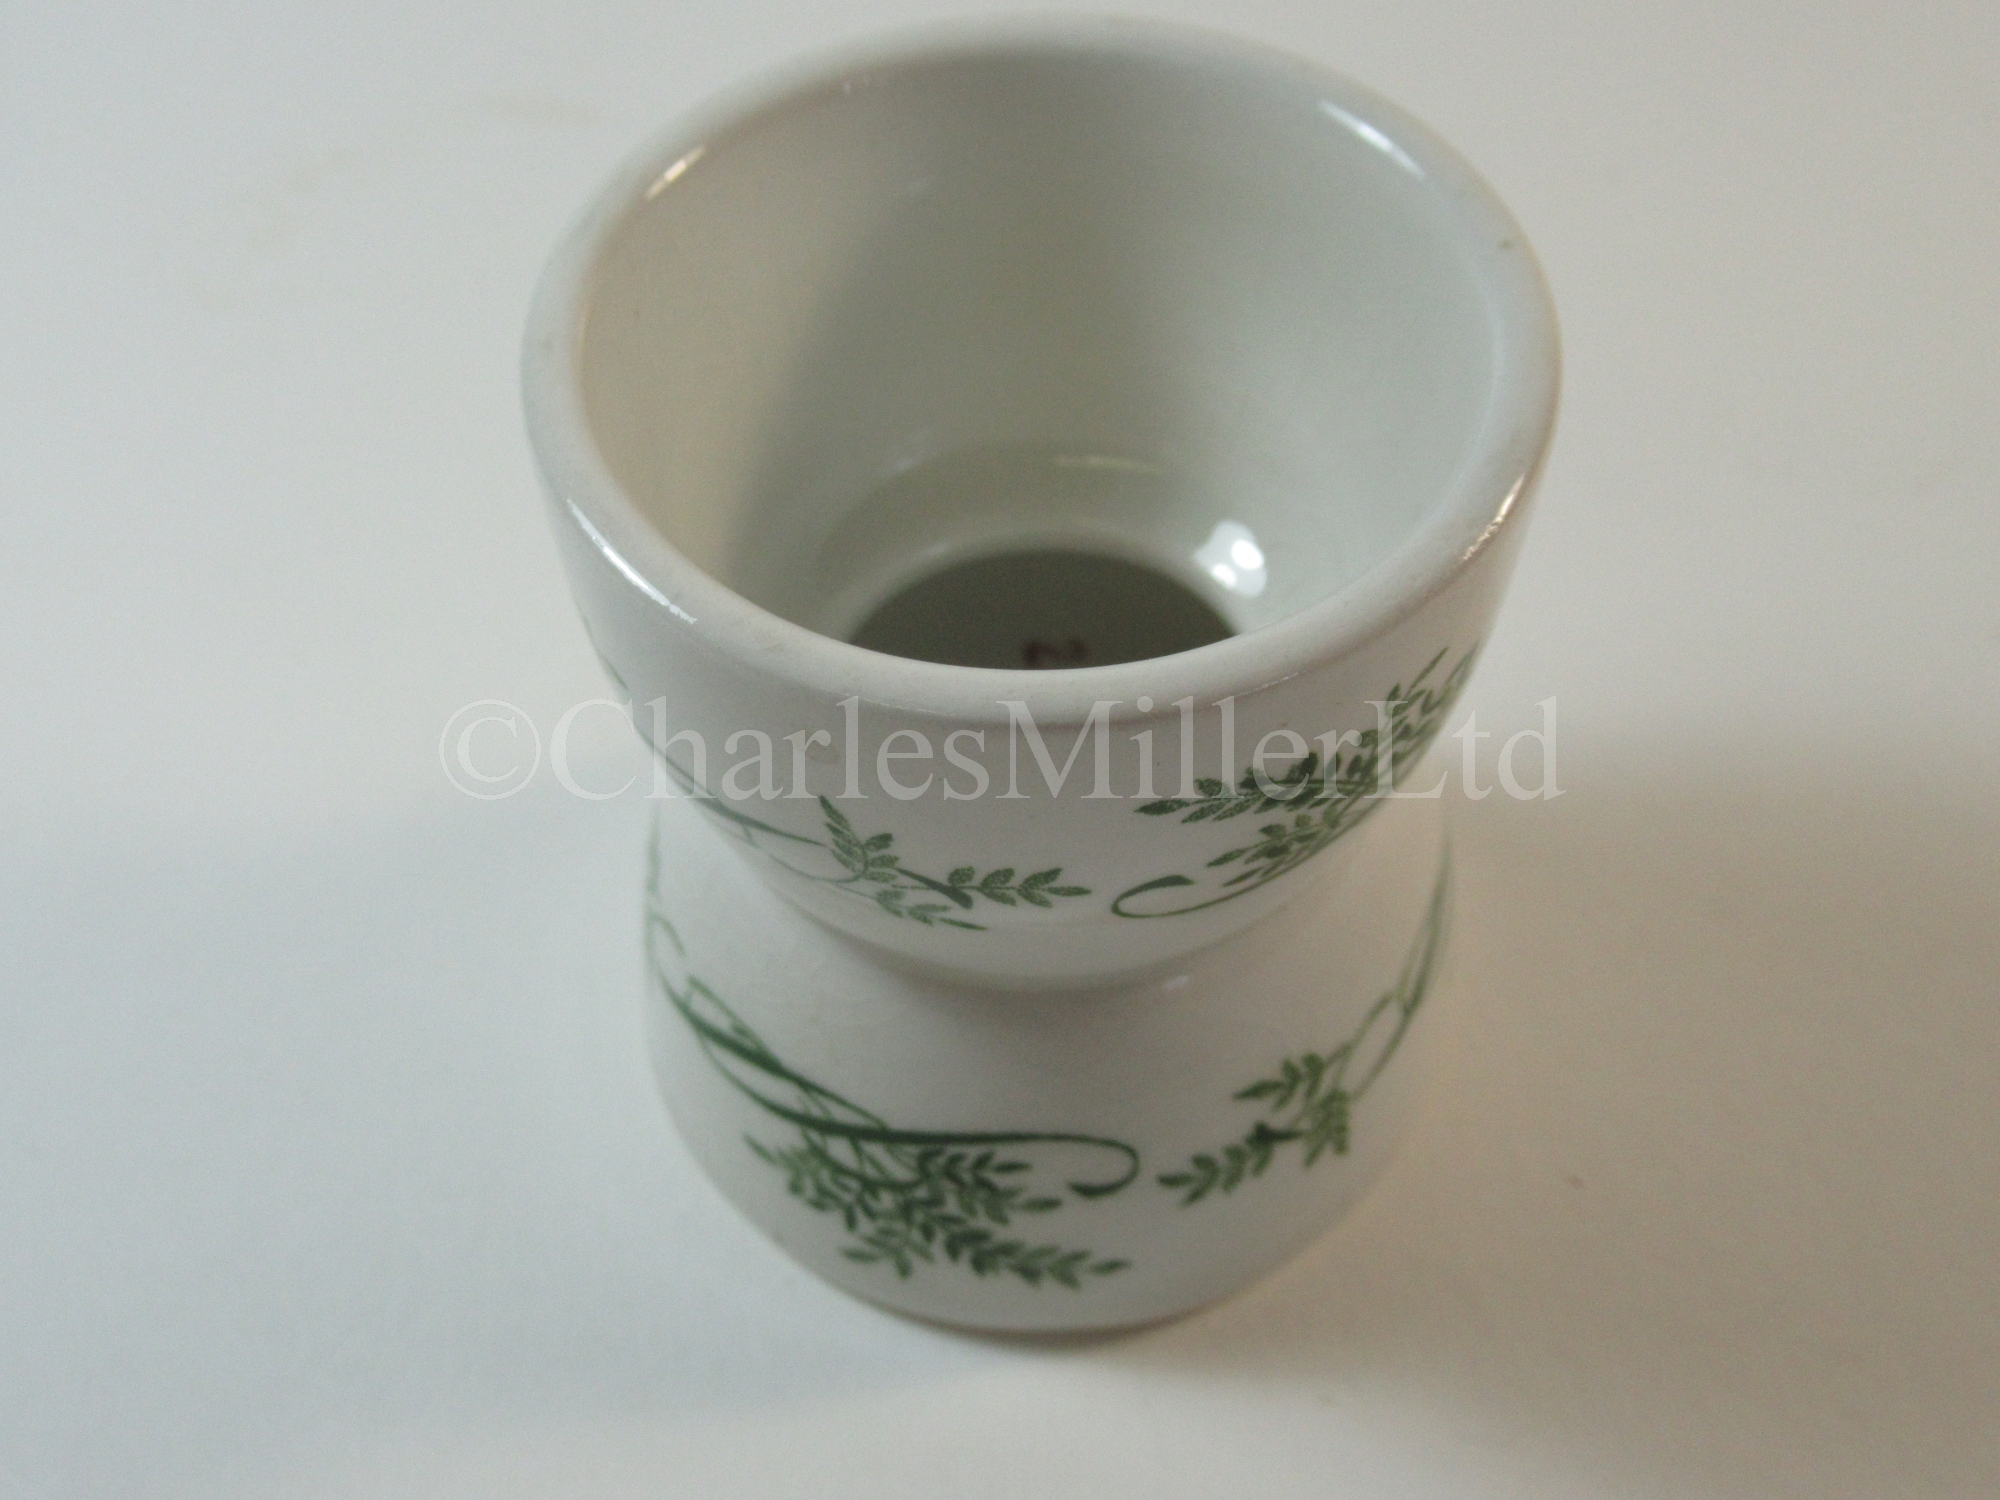 A British & Commonwealth Line egg cup - Image 5 of 5